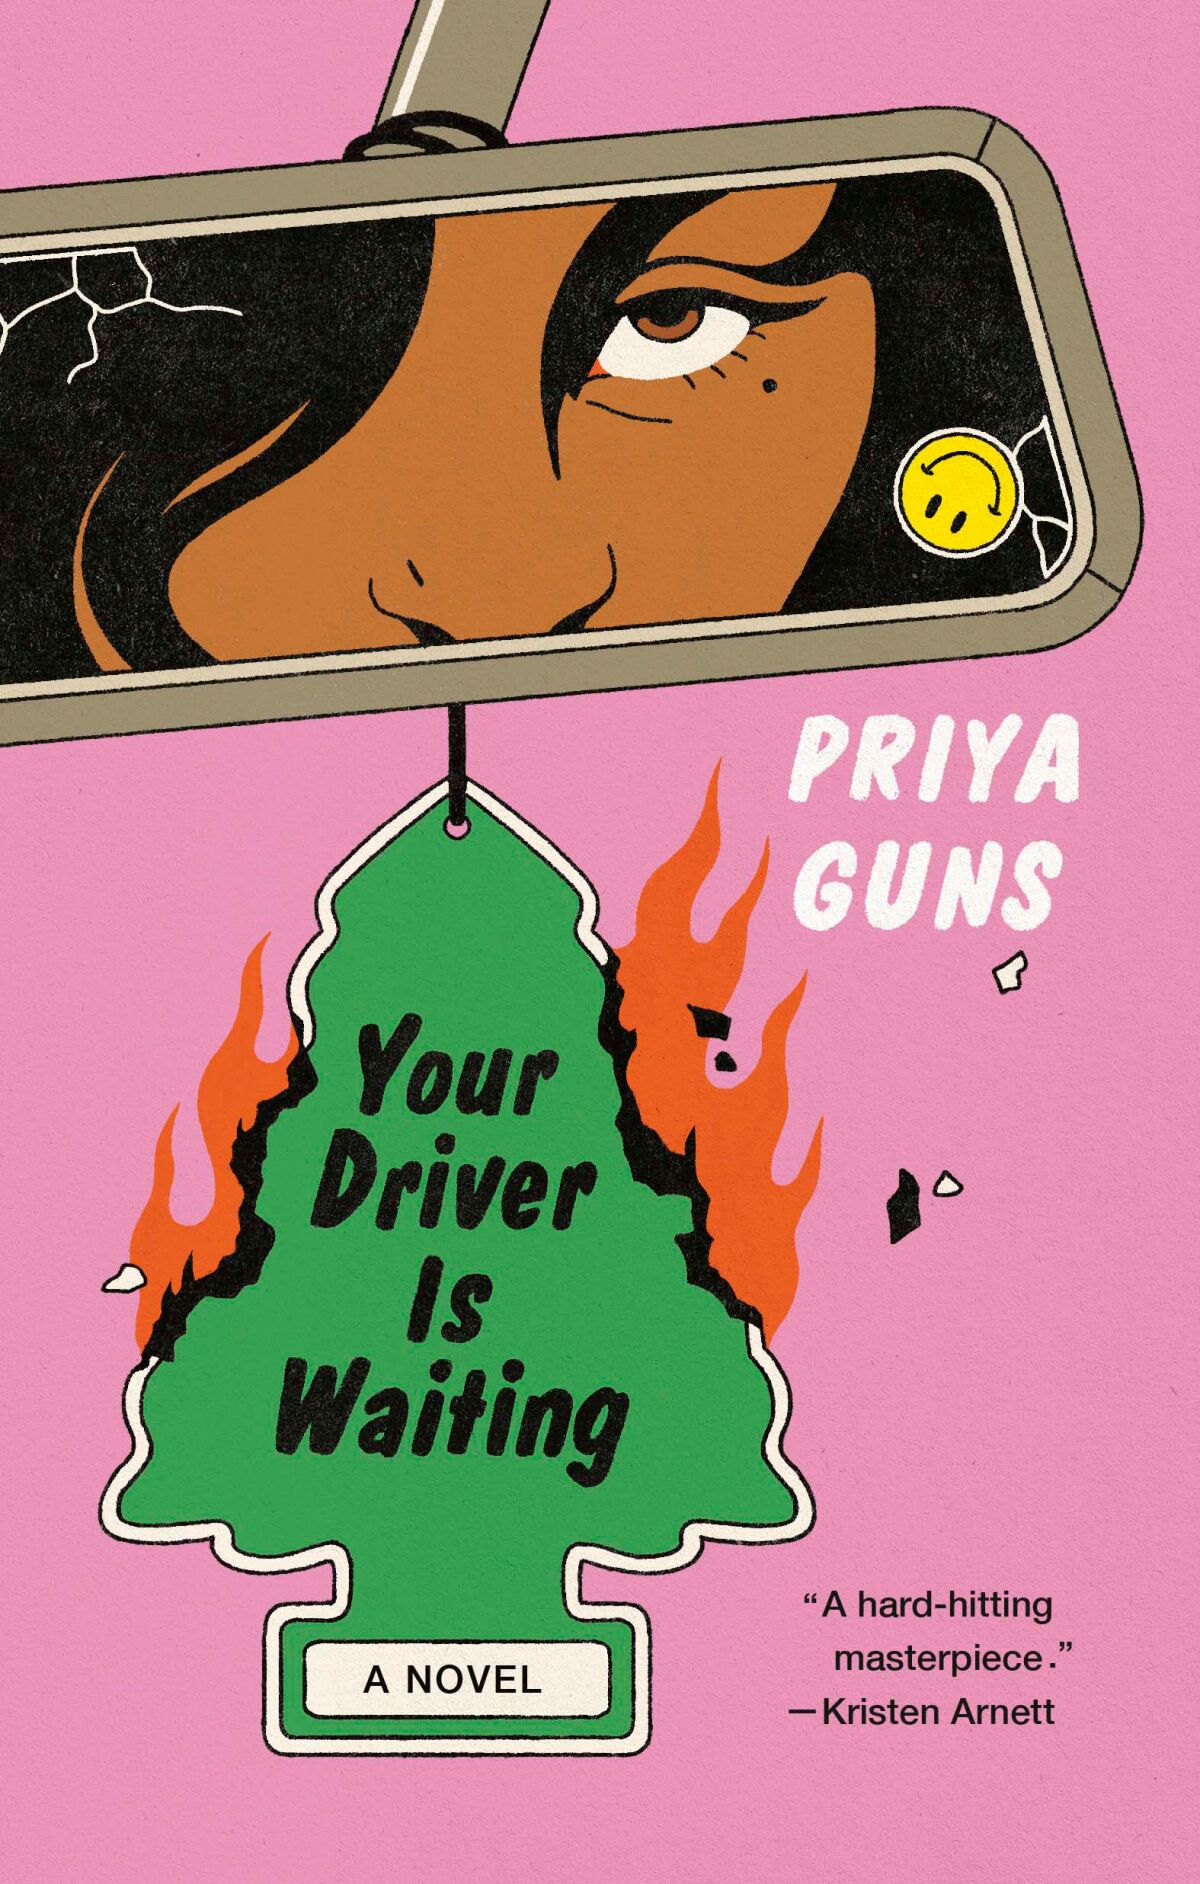 The cover of 'Your Driver Is Waiting' by Priya Guns